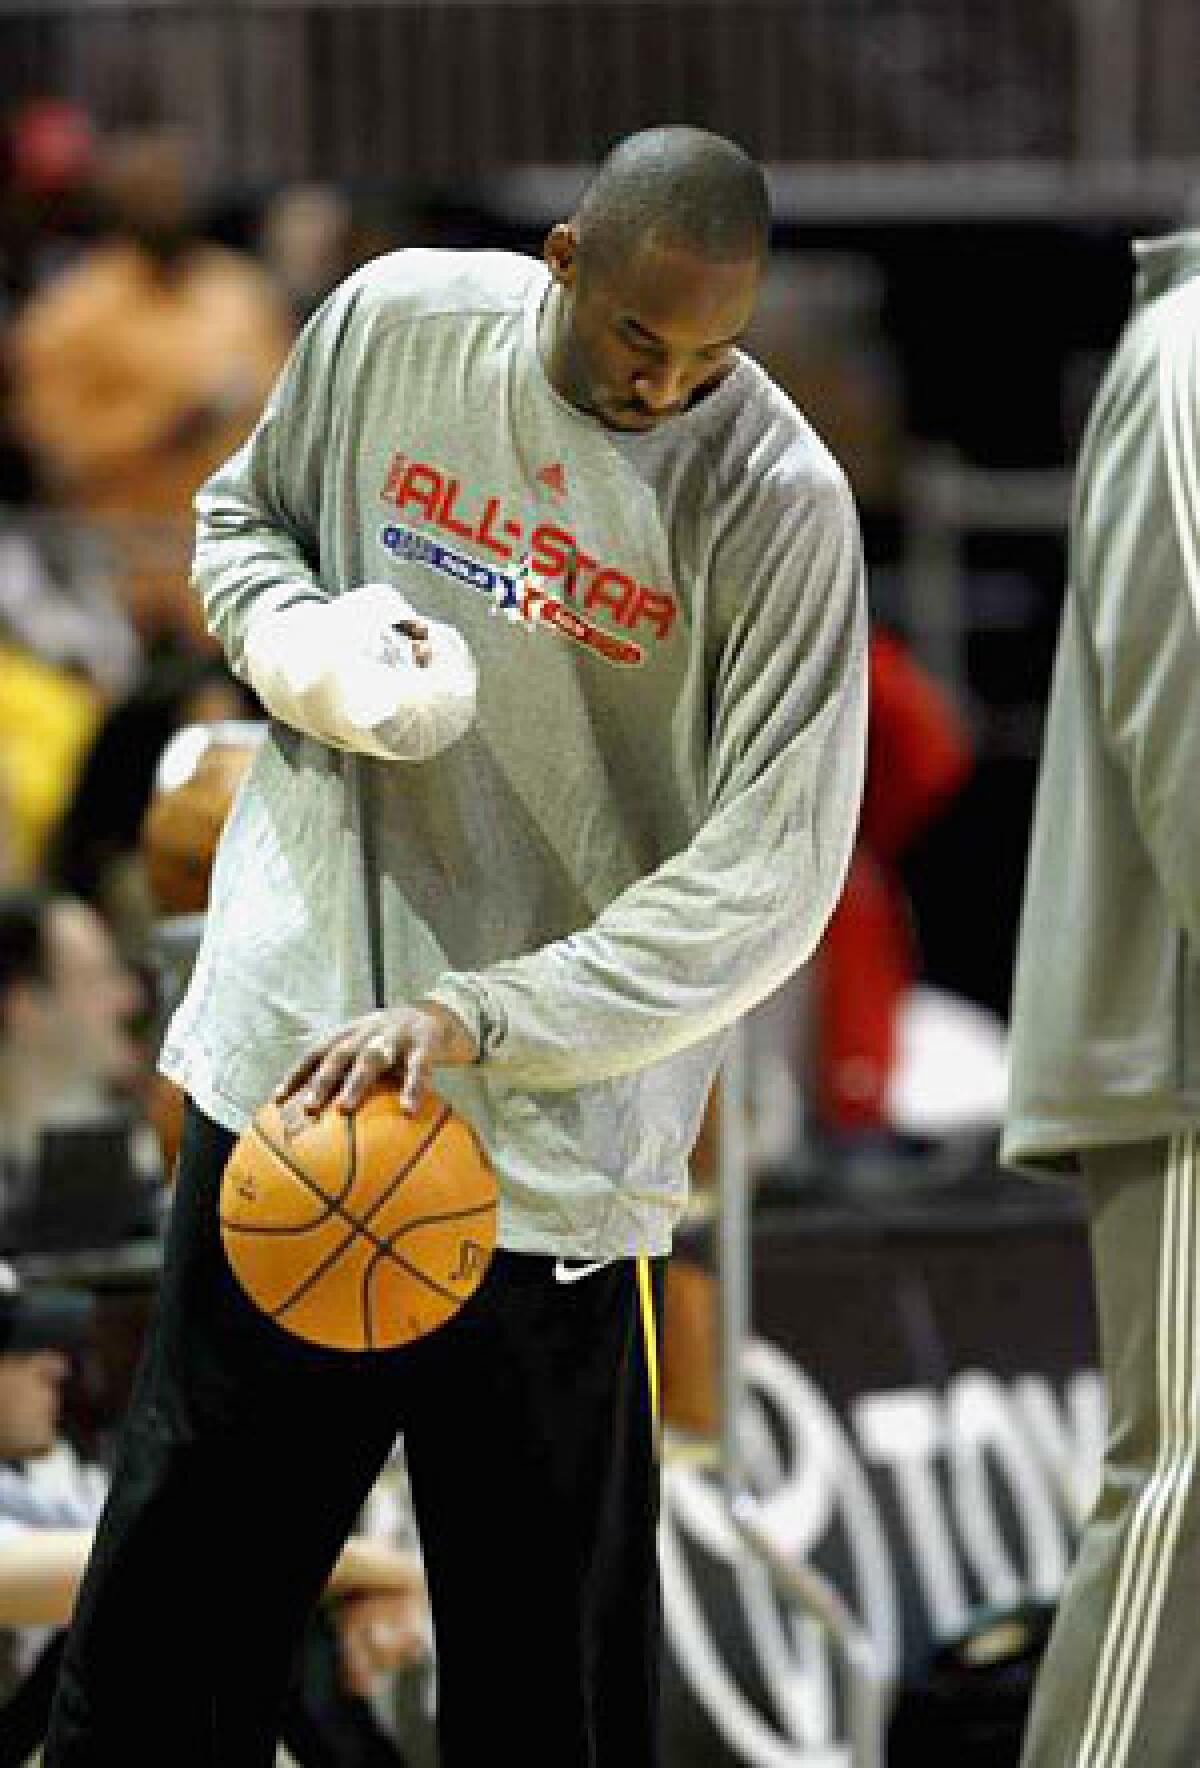 Kobe Bryant played just three minutes in the All-Star game, fulfilling his obligation to play and not miss any Lakers games. He has opted to forgo surgery on his injured right pinkie until after the season.